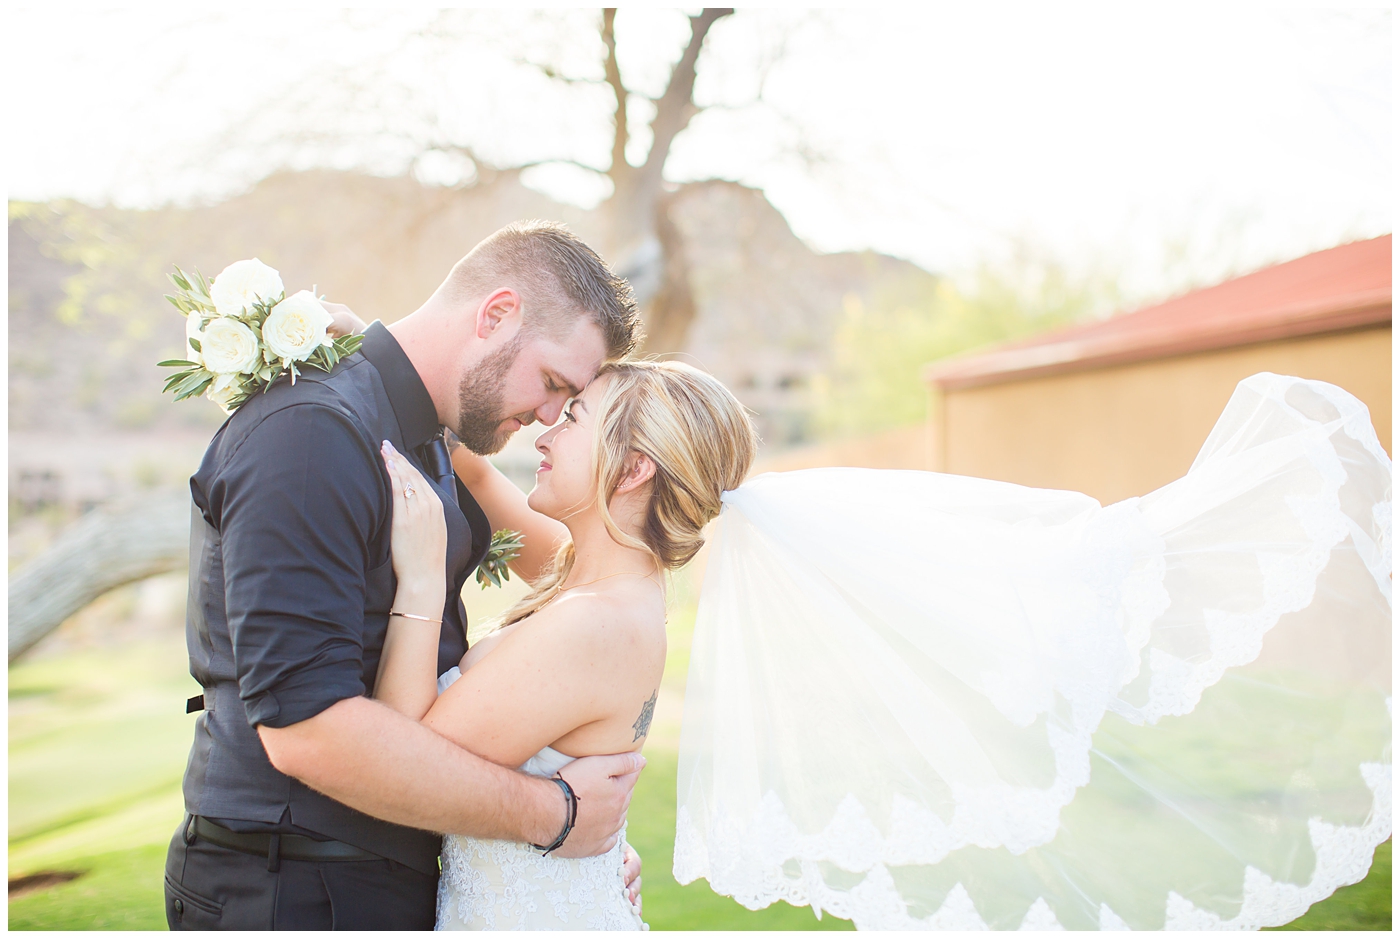 bride with fishtail braid and strapless dress with white rose and greenery bouquet with groom in black pants and vest and tie with rolled up shirt sleeves with succulent boutonniere wedding day portrait